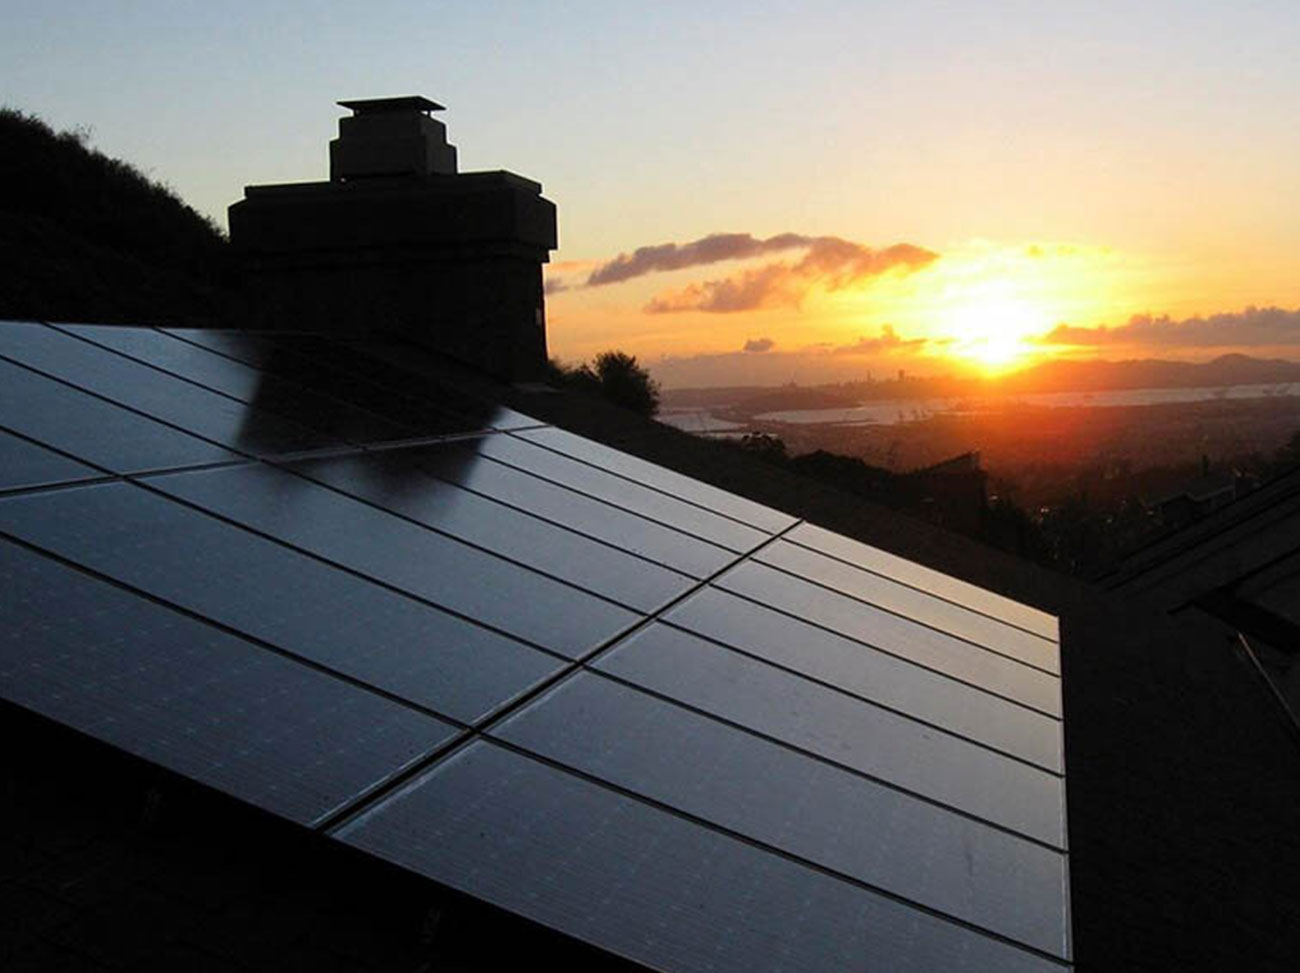 Getting a New Roof? Here are 5 Reasons Why Now Is the Time To Also Go Solar!